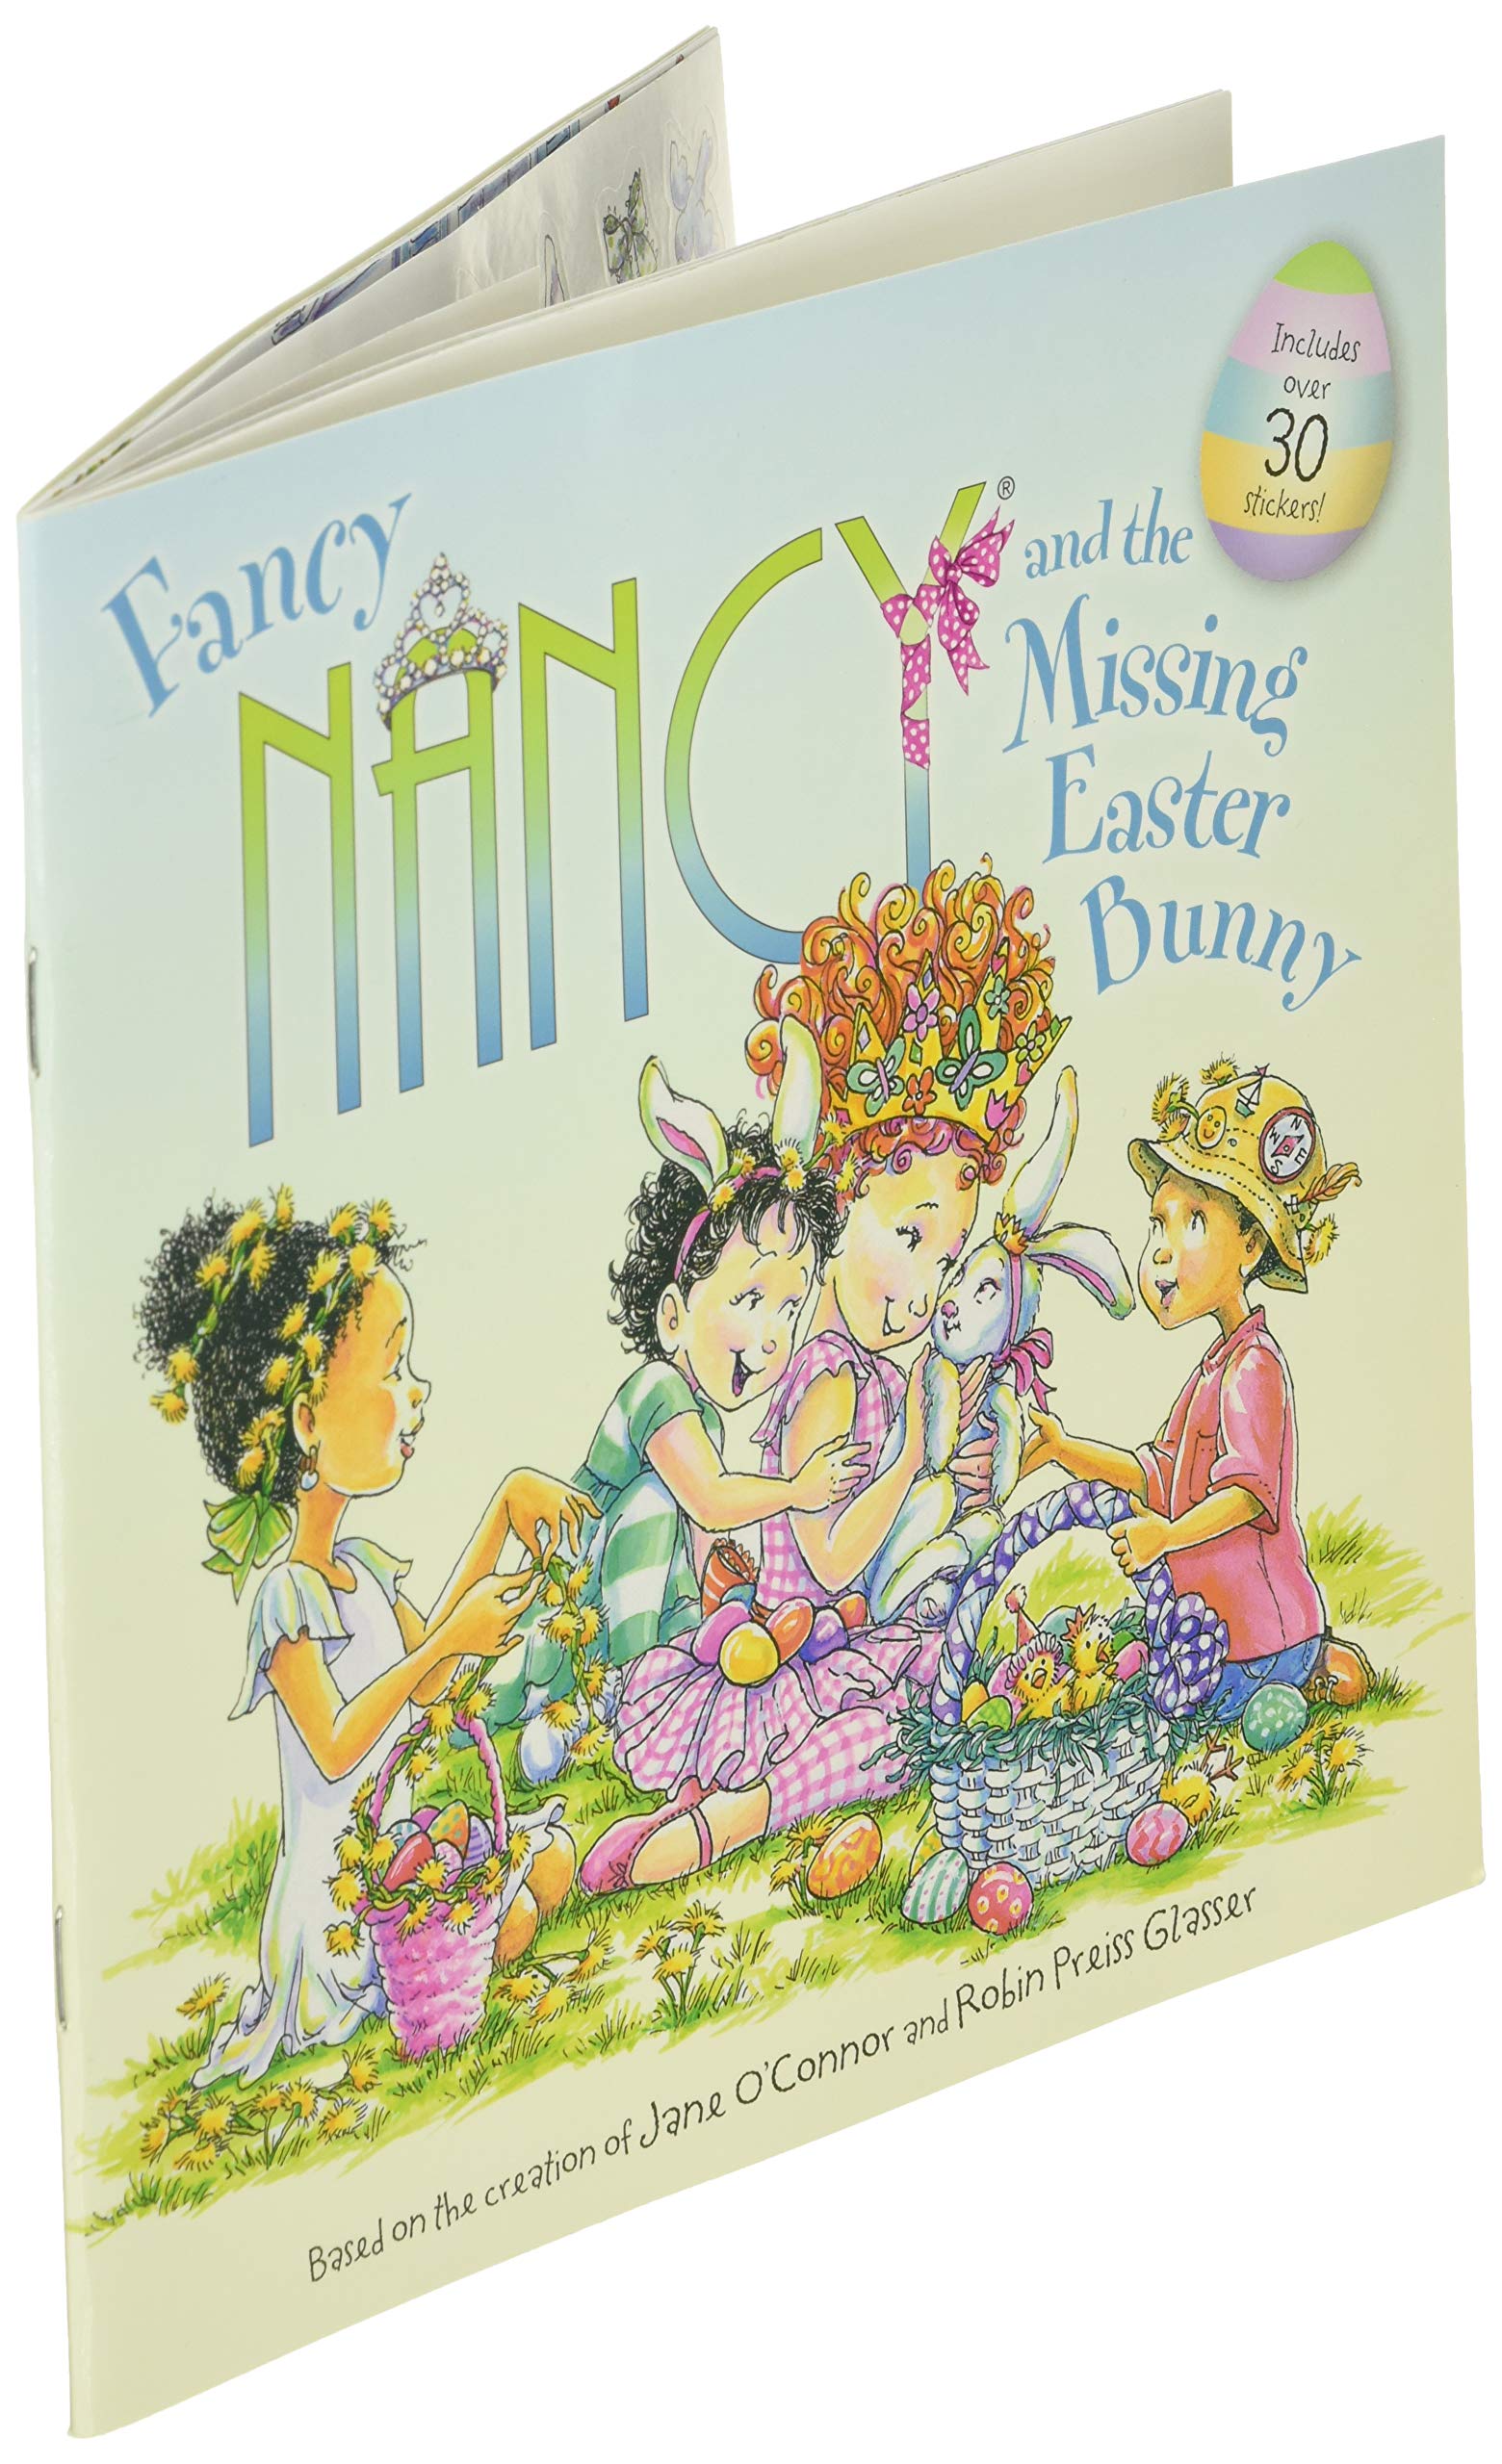 Fancy Nancy and the Missing Easter Bunny: An Easter And Springtime Book For Kids